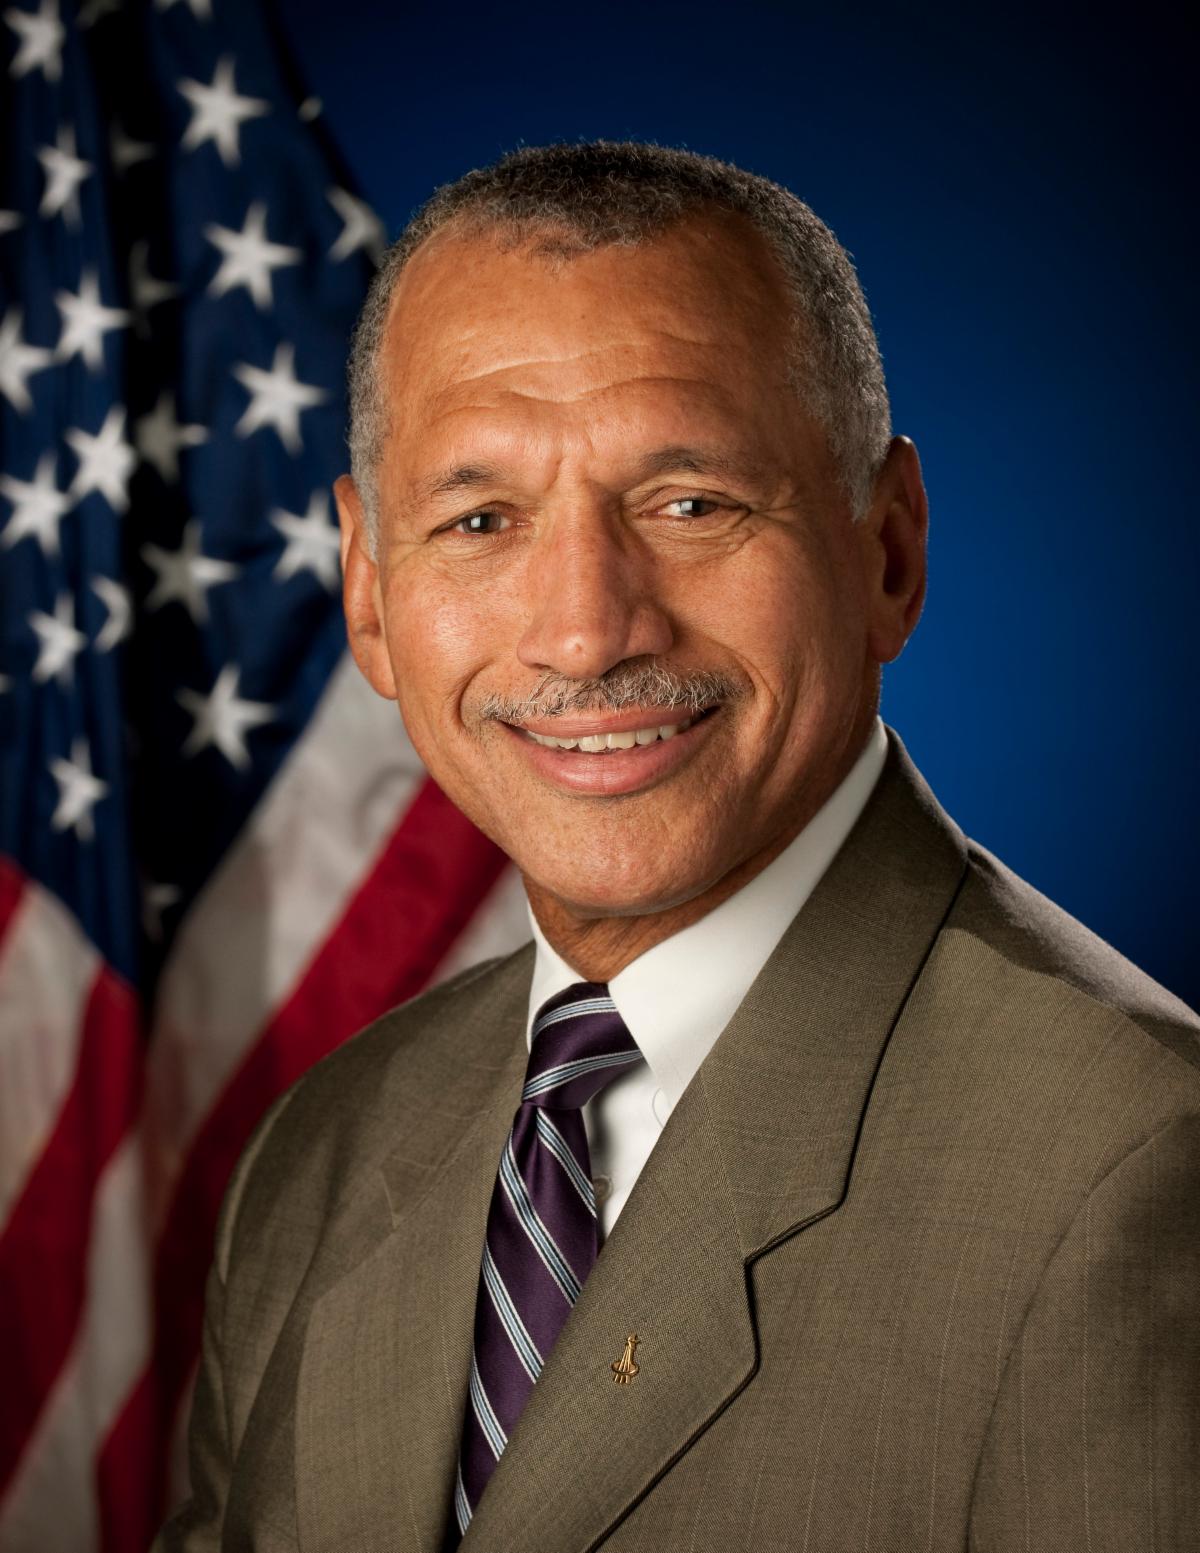 Major General Charles Bolden Honored with the 2020 Wright Brothers Memorial Trophy